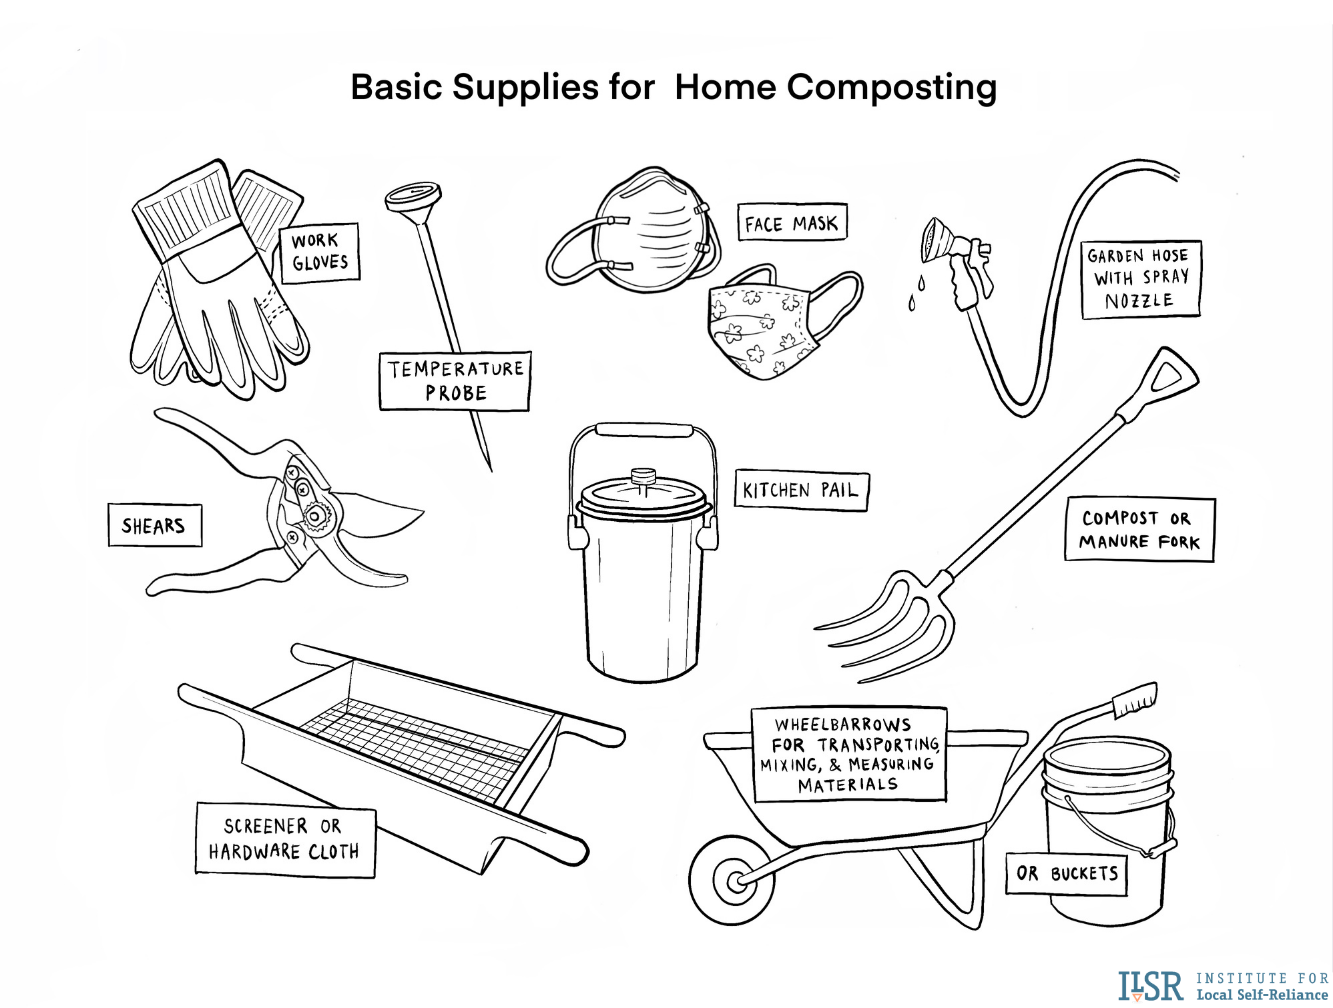 https://cdn.ilsr.org/wp-content/uploads/2020/09/Composting-tools-with-logo.png